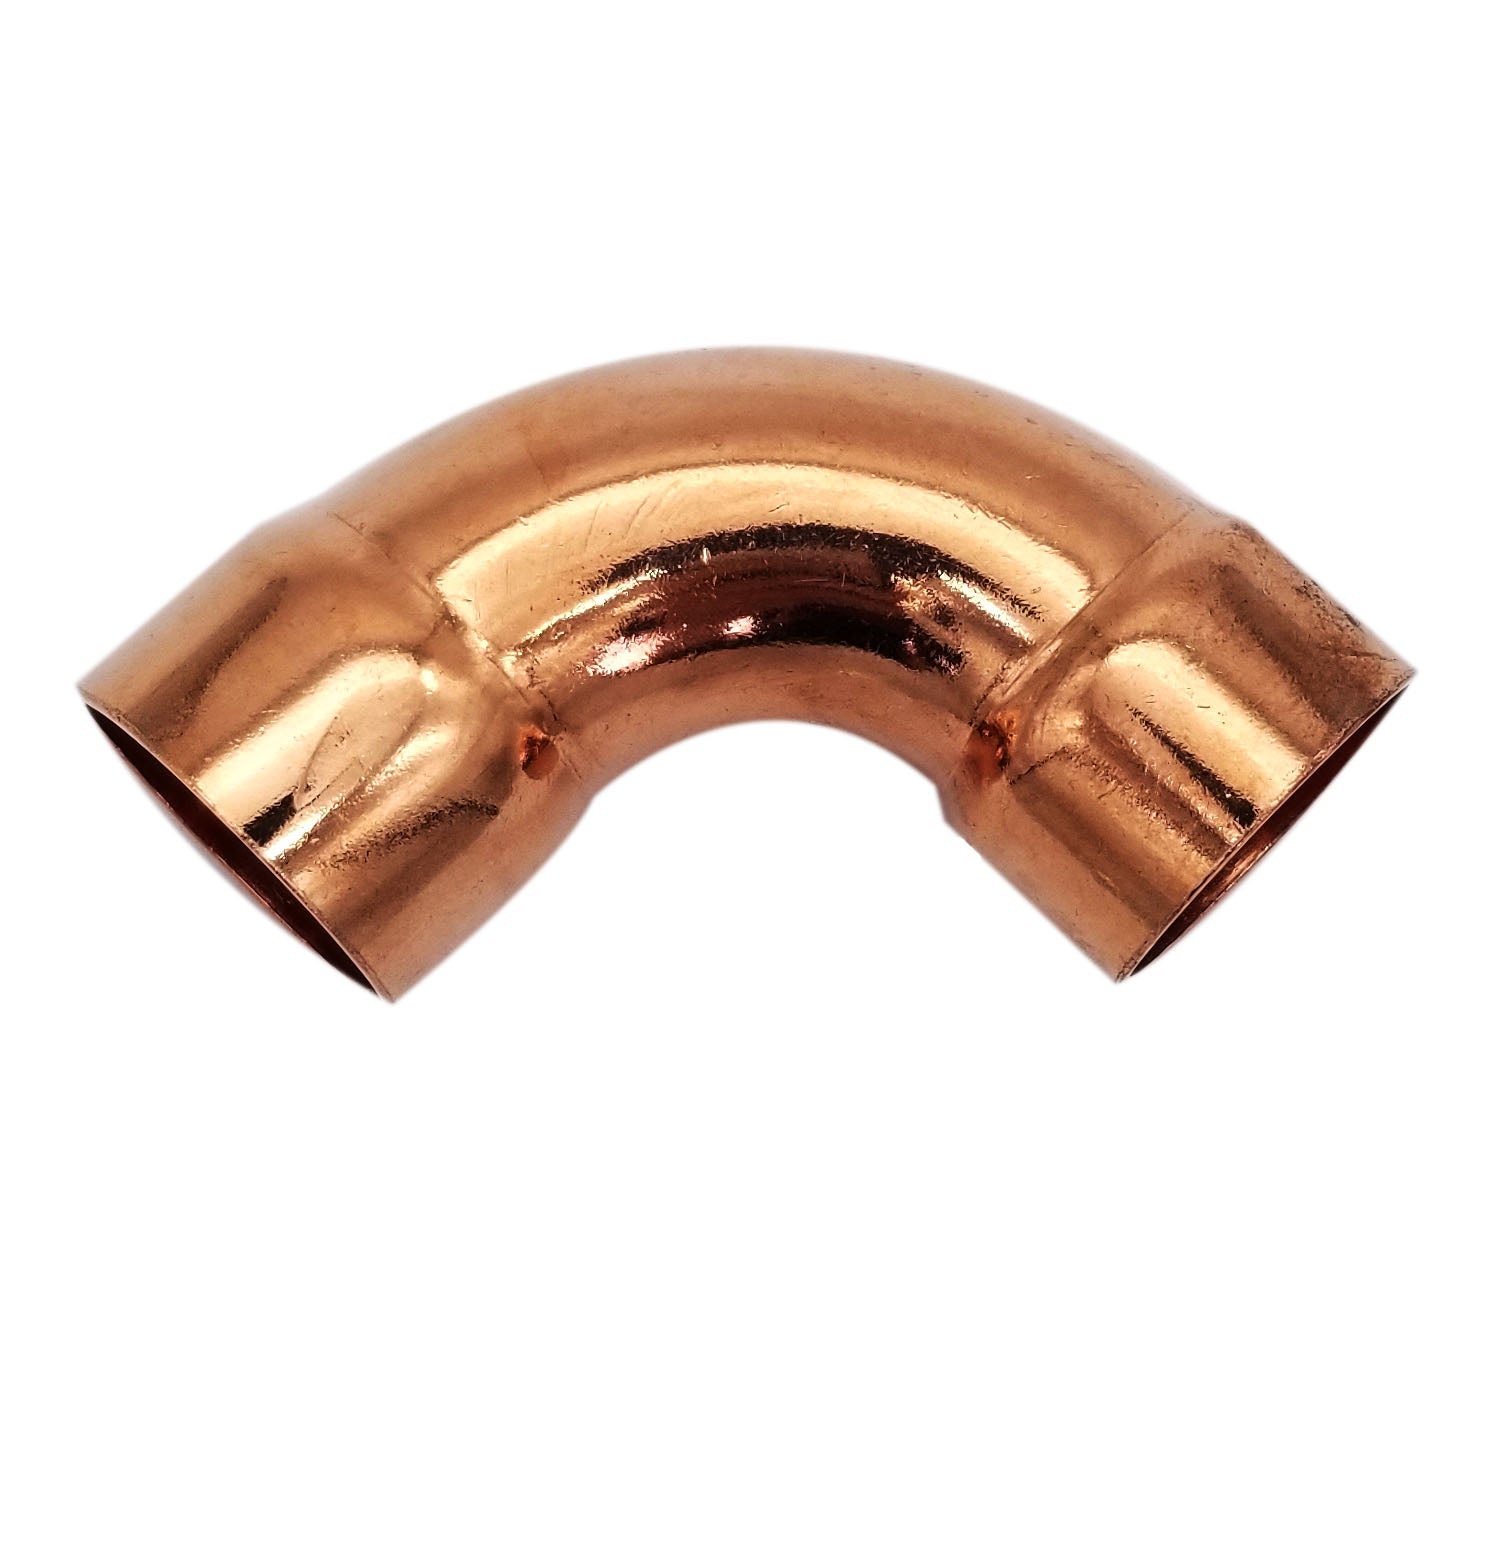 Copper Fitting 3/8 Inch (HVAC Outer Dimension) 1/4 Inch (Plumbing Inner Dimension) - Copper Long Radius 90° Elbow Fitting with 2 Solder Cups & HVAC – 99.9% Pure Copper - 5 Pack